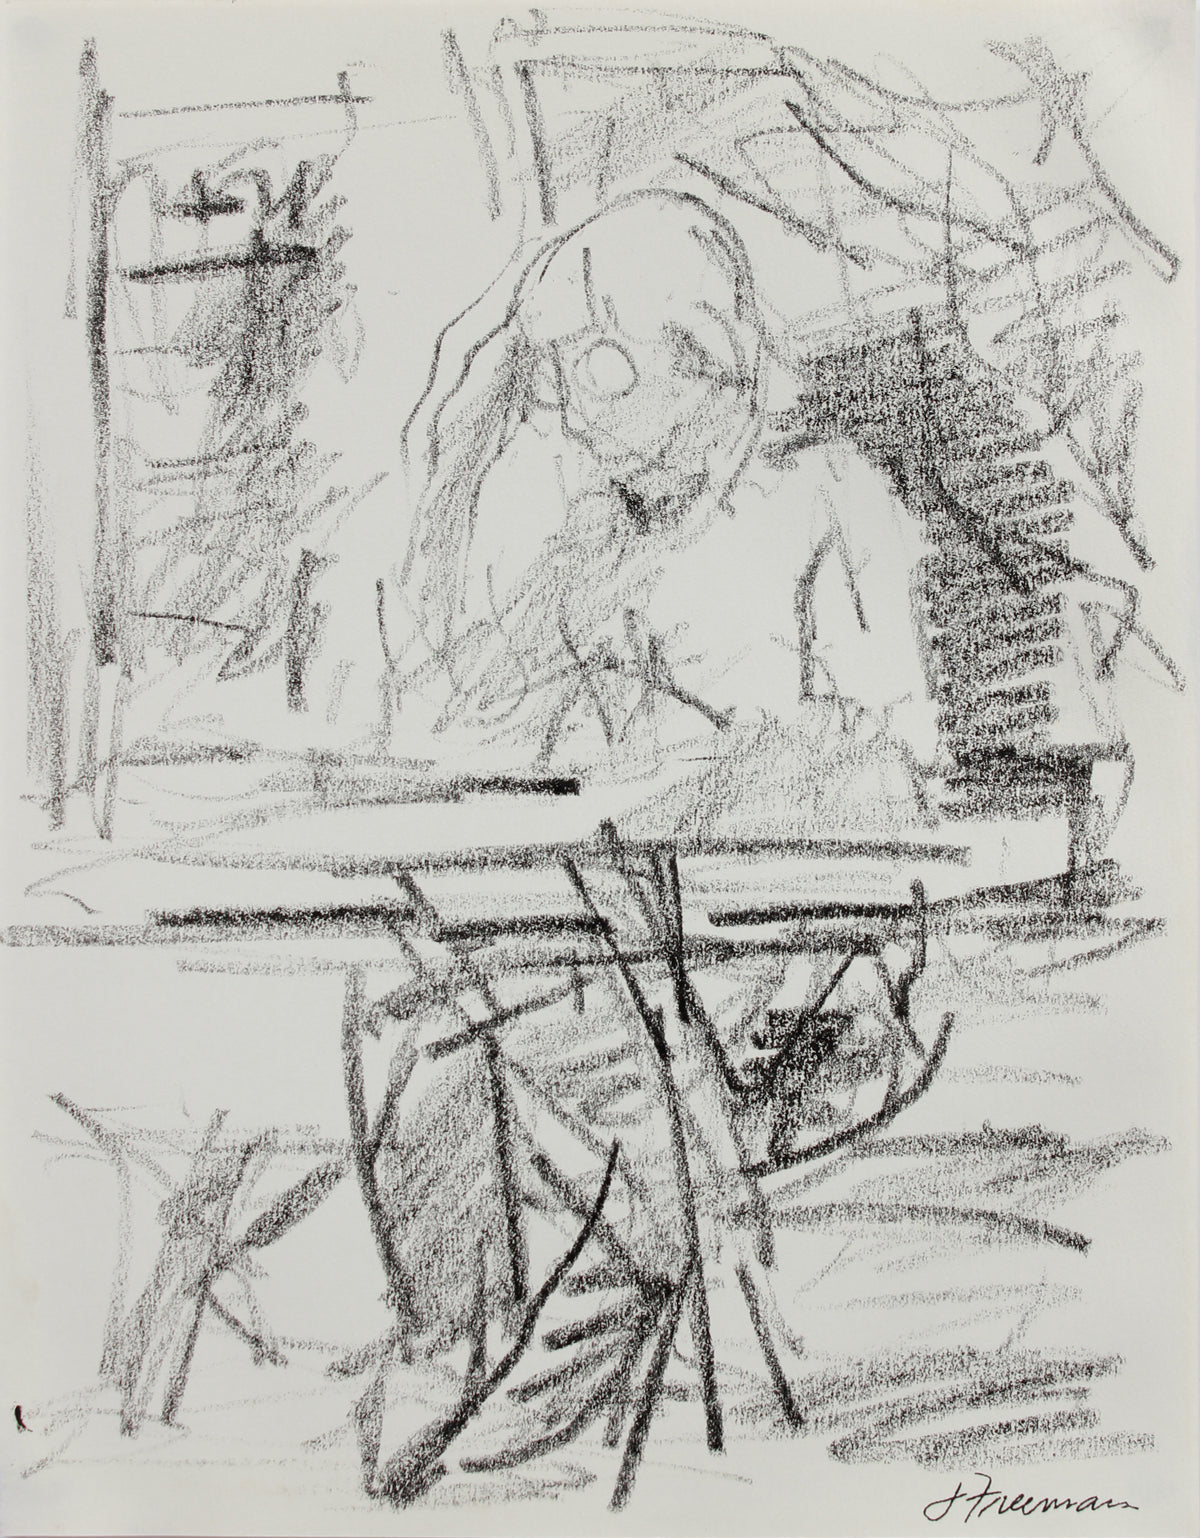 Seated Figure In Contemplation &lt;br&gt;1984 Charcoal &lt;br&gt;&lt;br&gt;#A9633